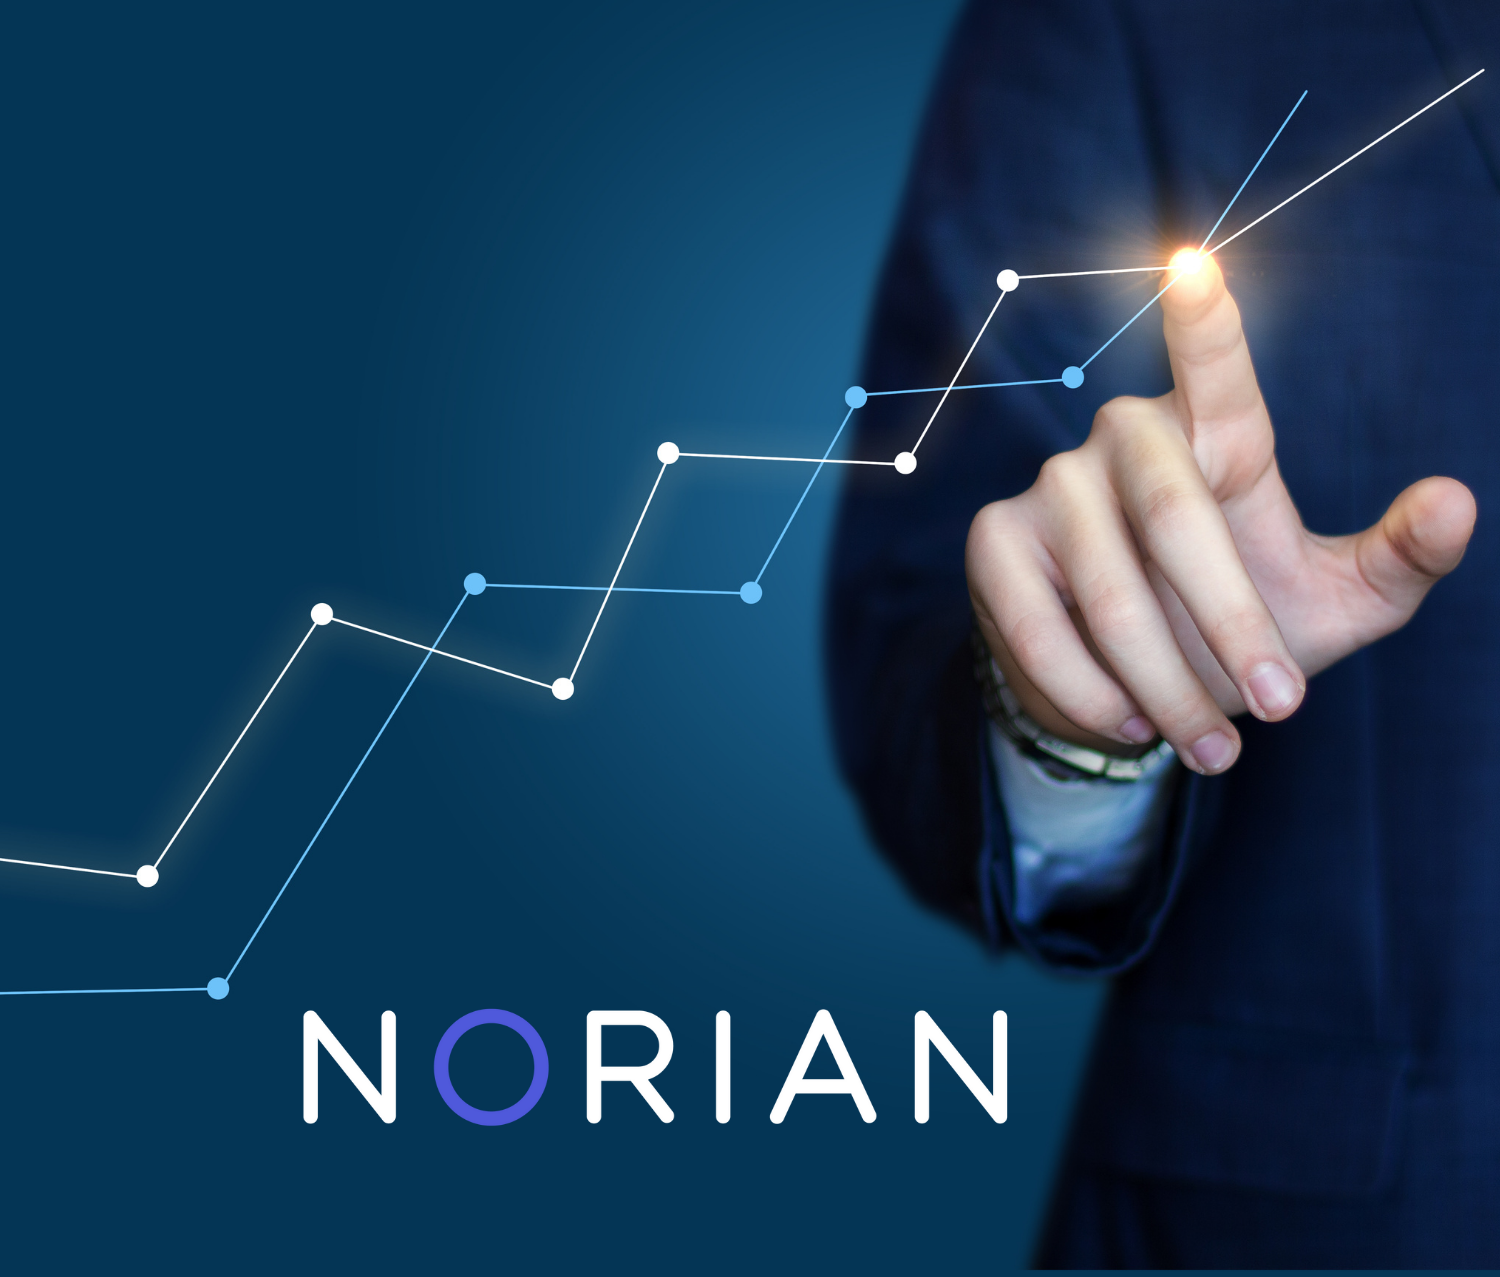 NORIAN to expand Vilnius operations